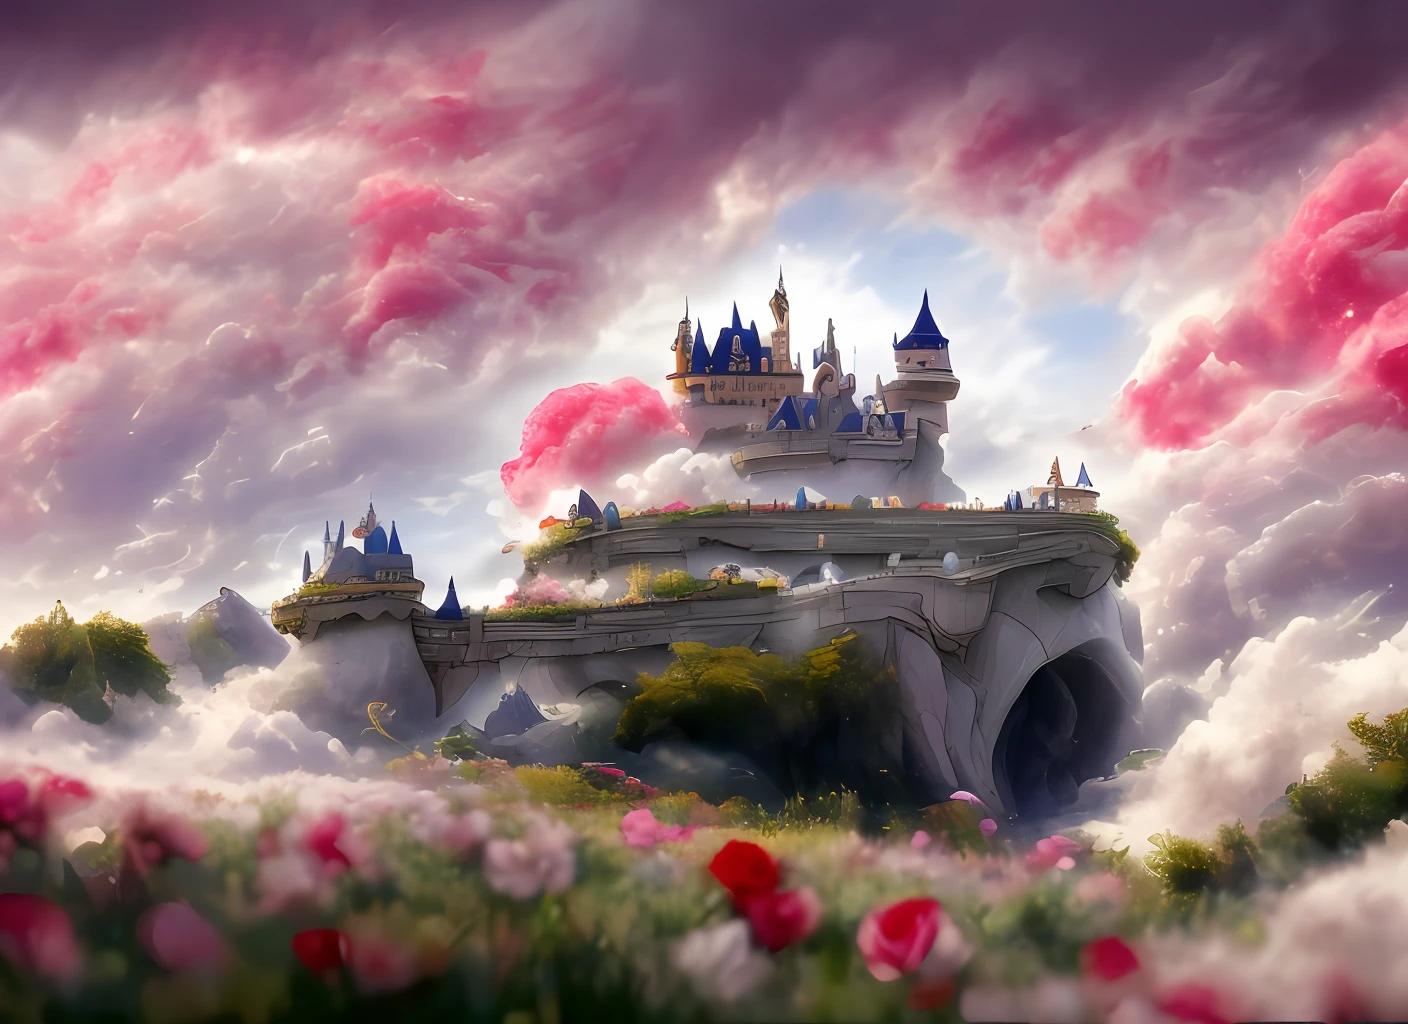 a discodifland with swirling clouds and flowers, (sky rose fantasy castle), (red roses), (ridiculous), dreamy, disney, painted by Thomas Kincaid, artstation, sharp focus, inspiring 8k wallpaper,